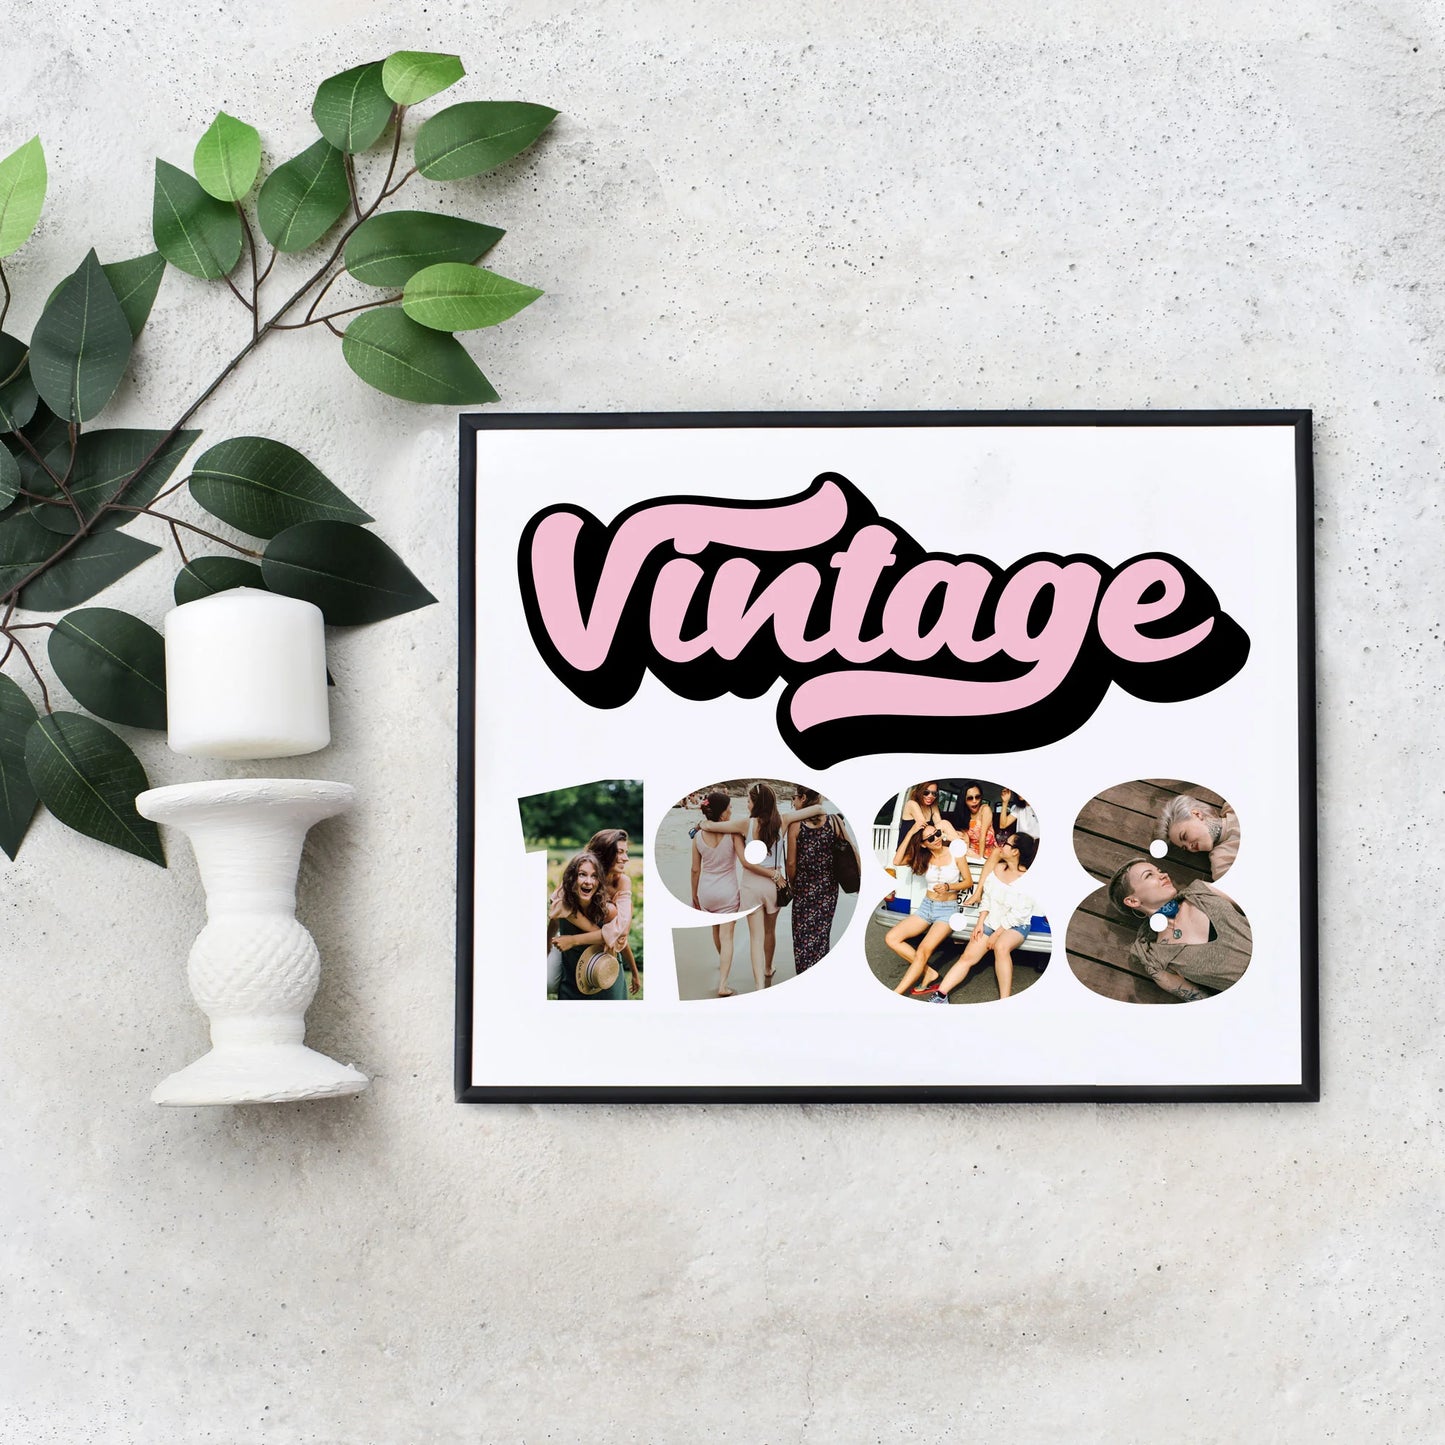 Quick Edit Yourself Vintage 1988 Birthday Photo Collage Budget Friendly Party Sign